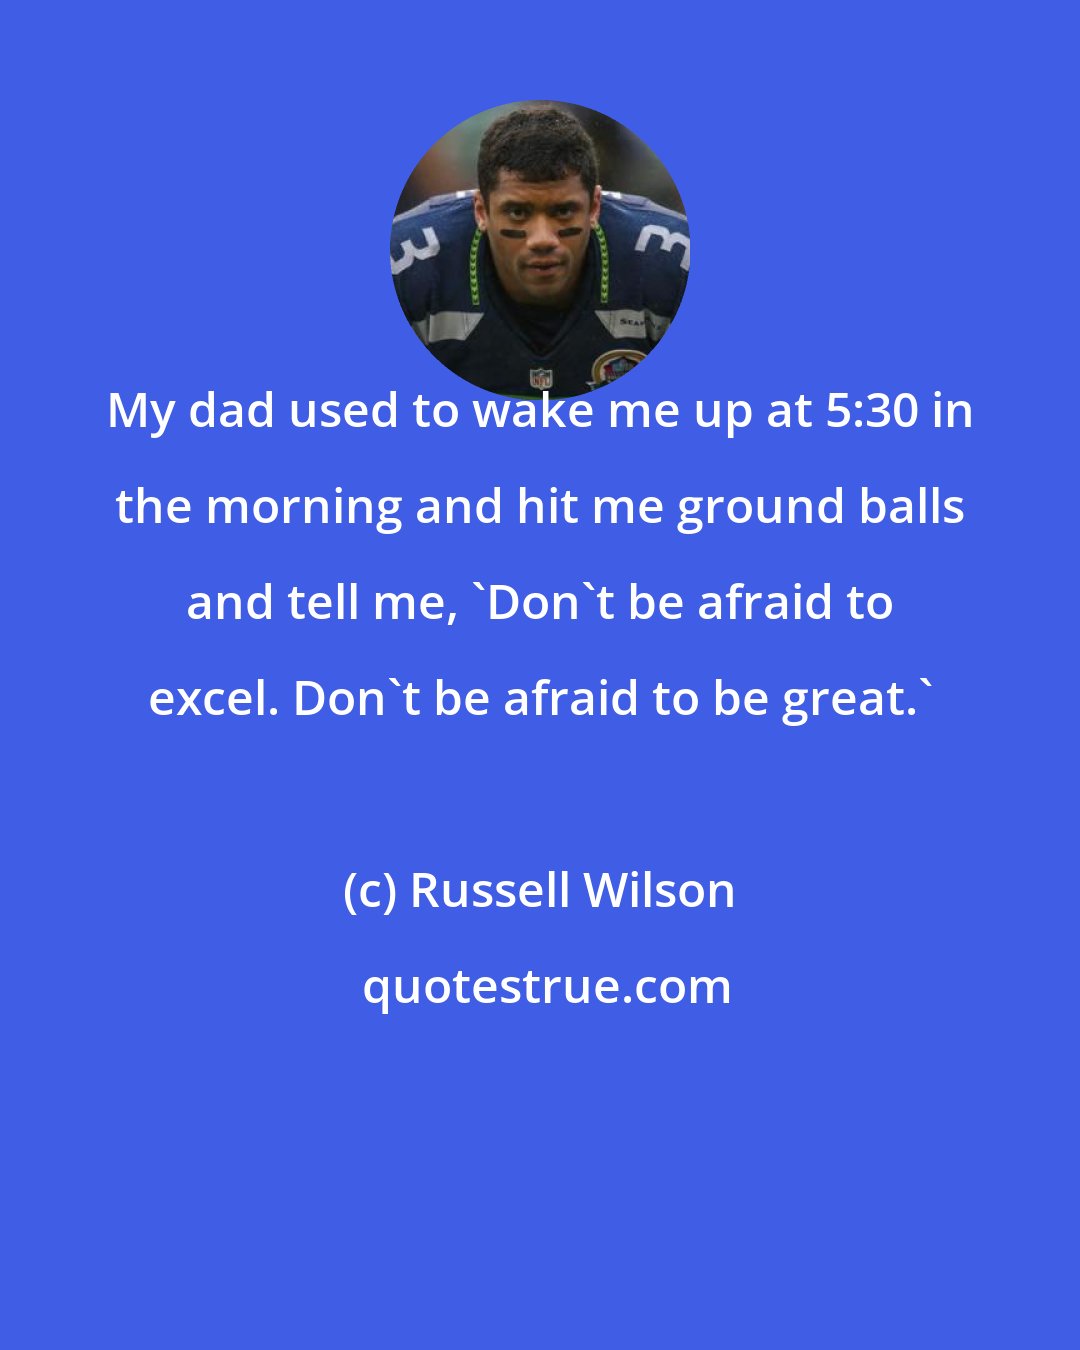 Russell Wilson: My dad used to wake me up at 5:30 in the morning and hit me ground balls and tell me, 'Don't be afraid to excel. Don't be afraid to be great.'